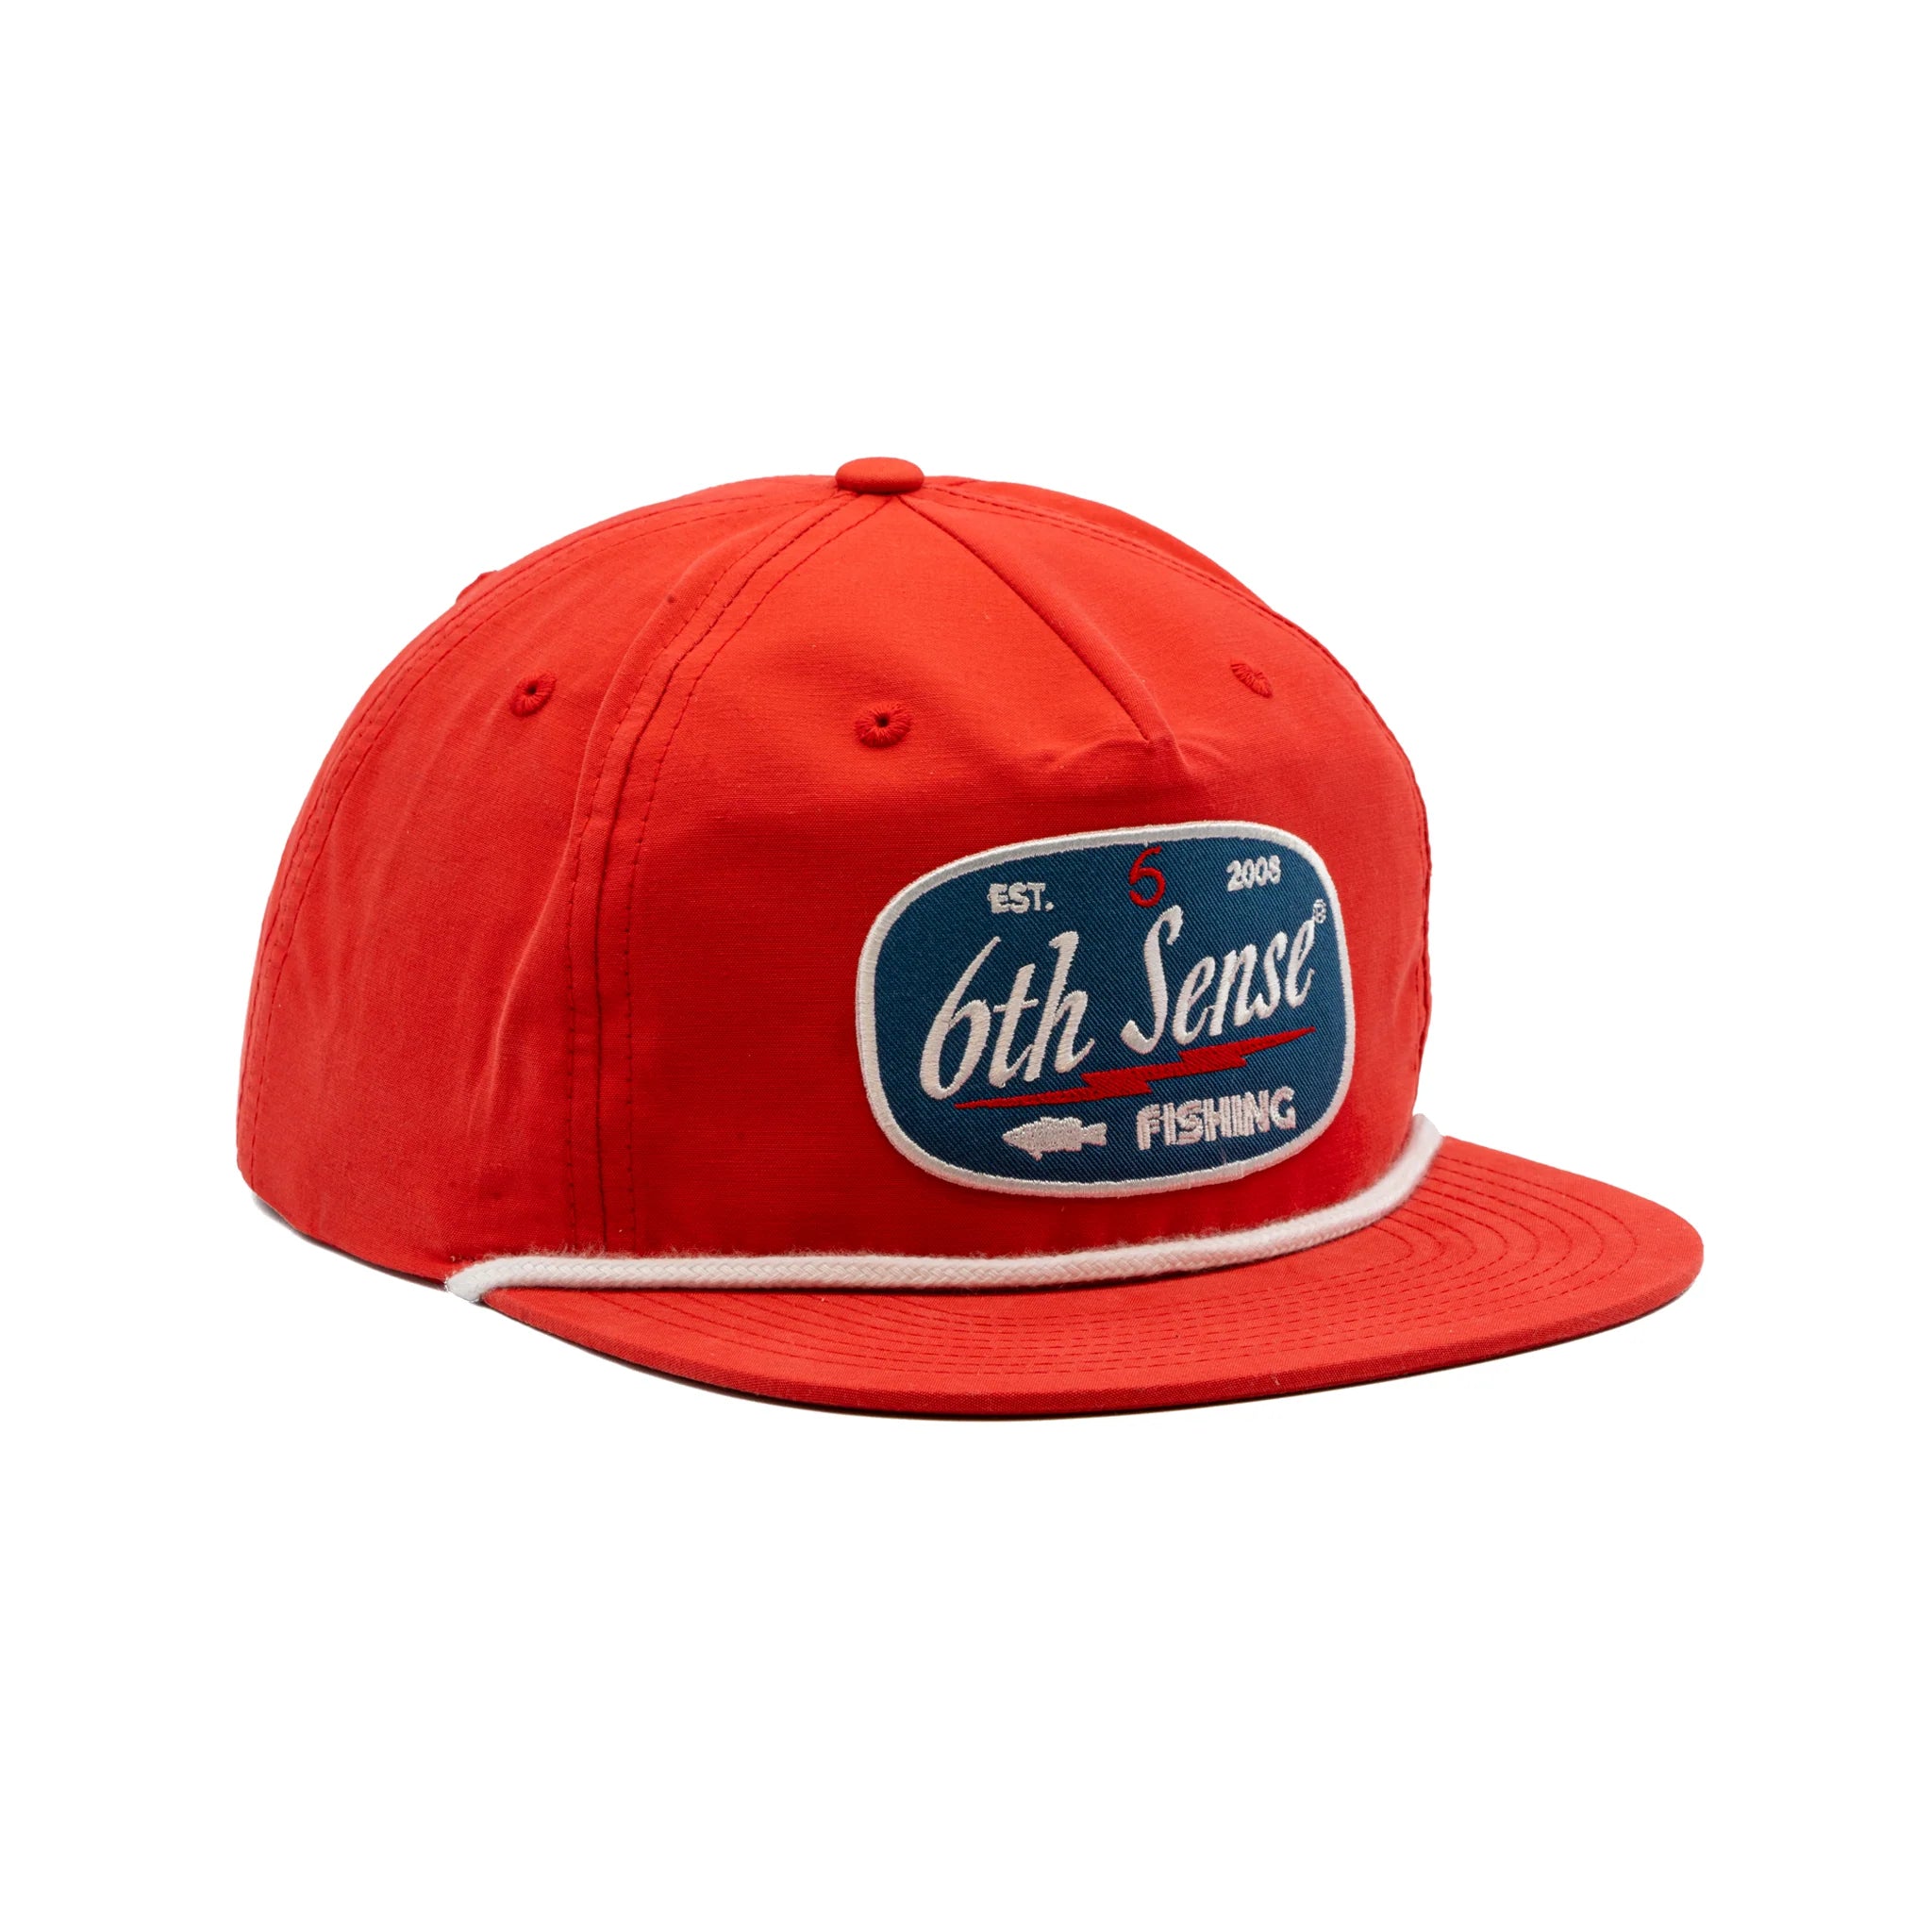 Buy old-timer-americas-sport-red-white 6TH SENSE HATS